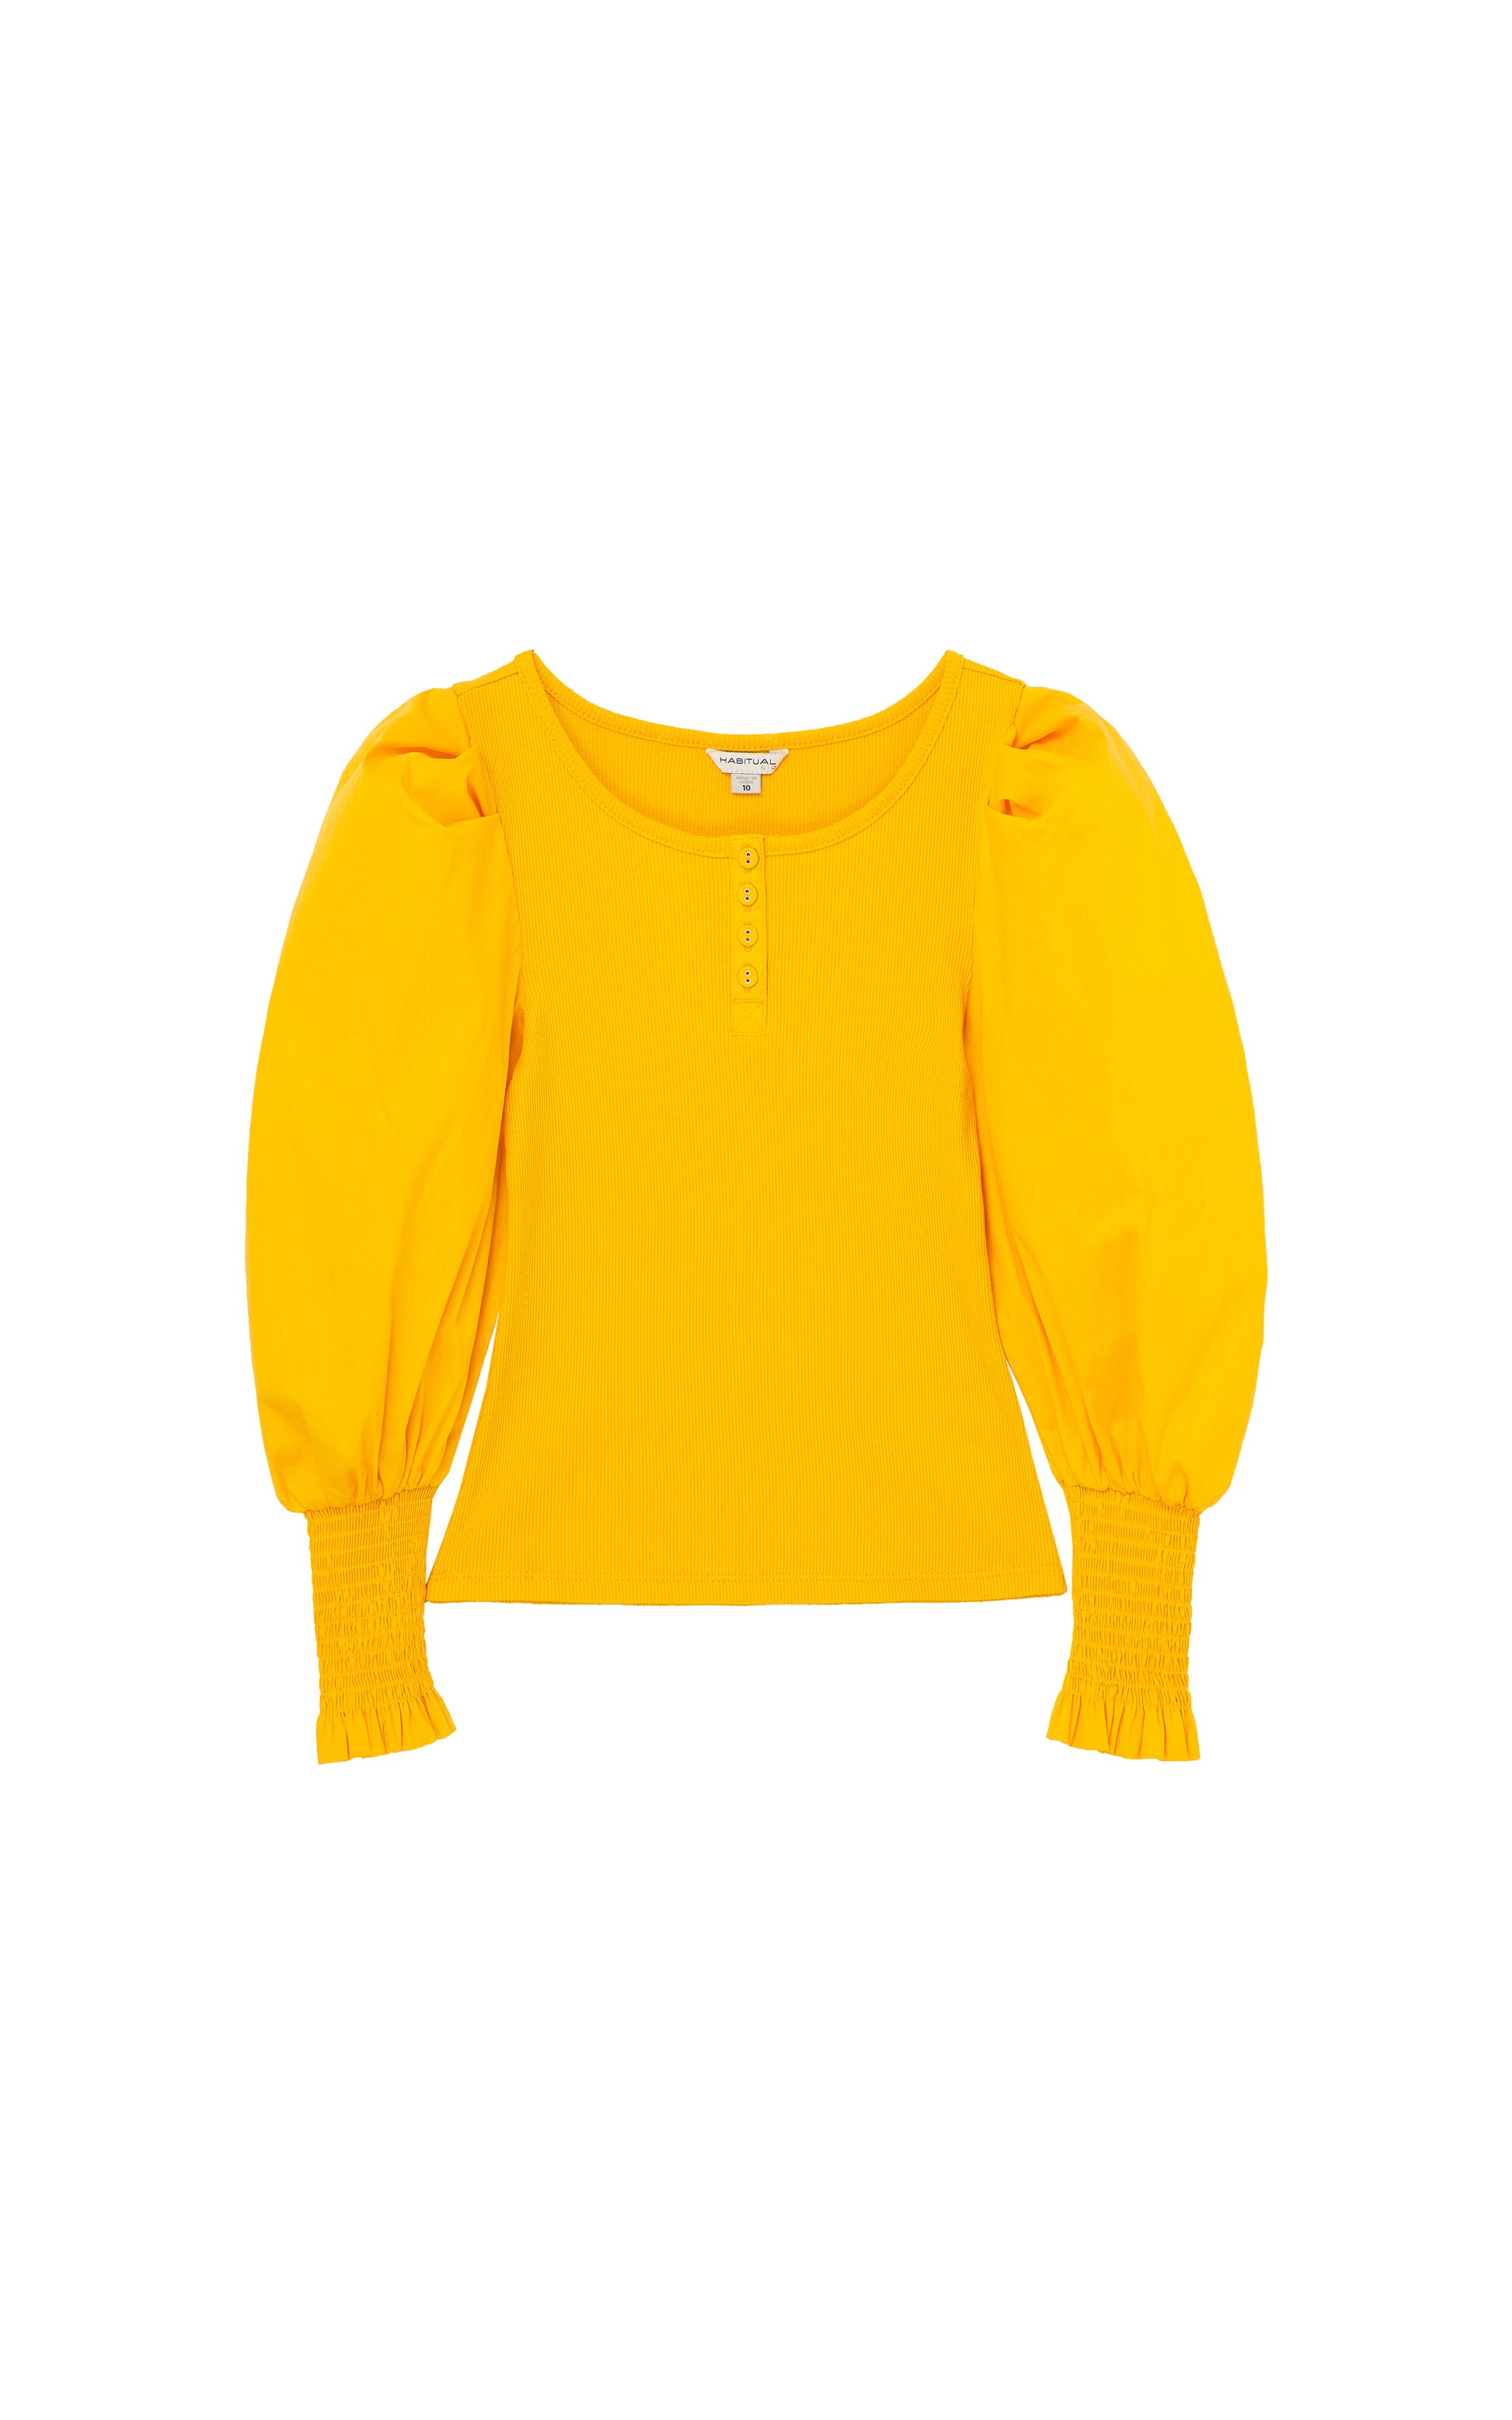 YELLOW  LONG-SLEEVE TOP WITH FOUR BUTTONS AT THE COLLAR, PUFFY SLEEVES, AND SMOCKED CUFFS